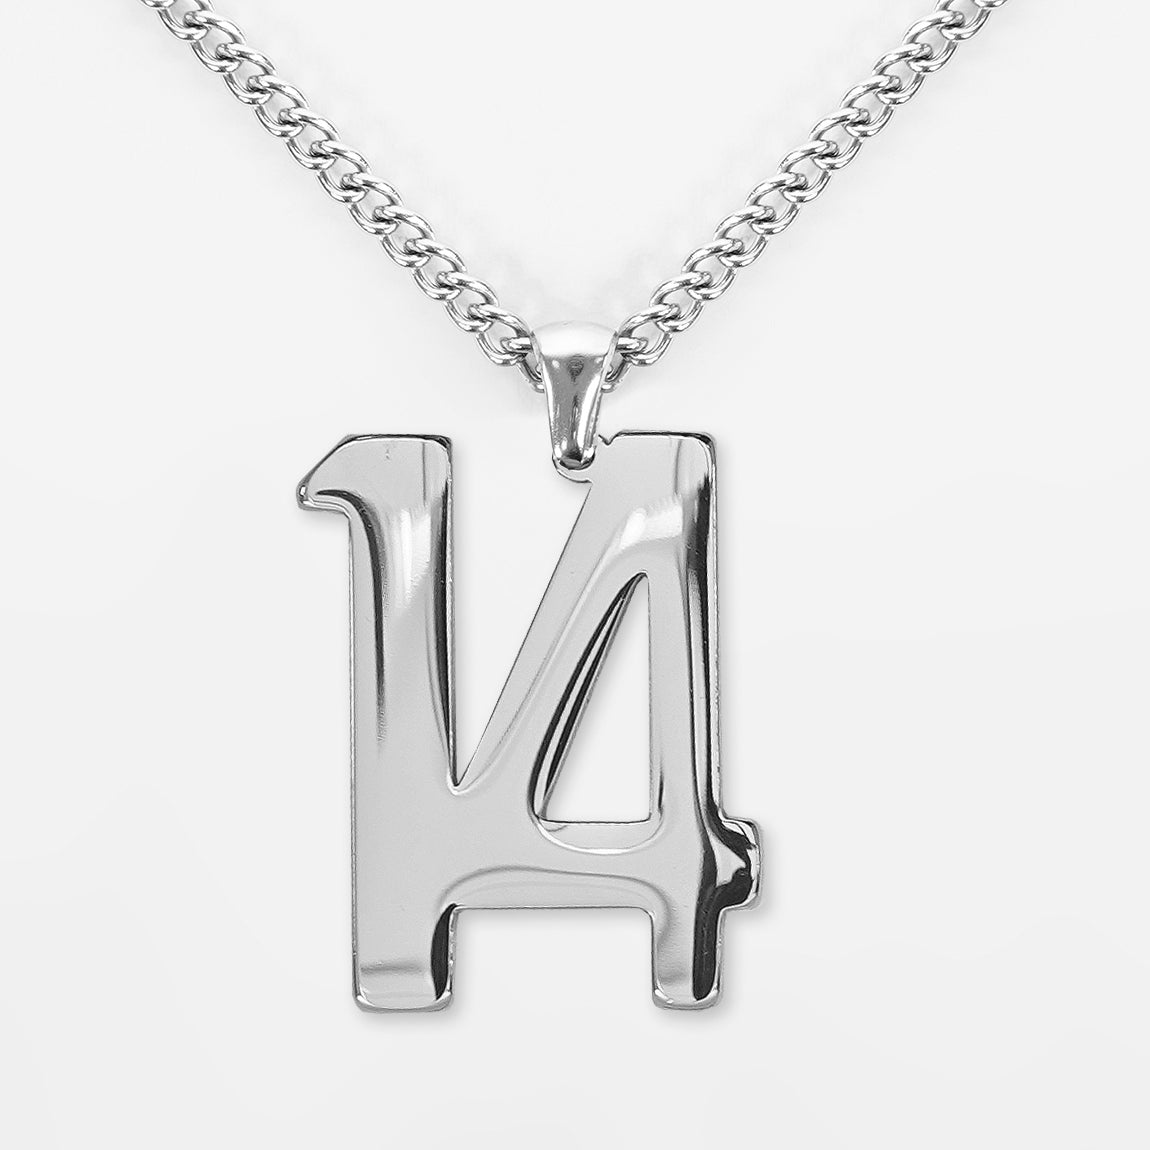 14 Number Pendant with Chain Necklace - Stainless Steel